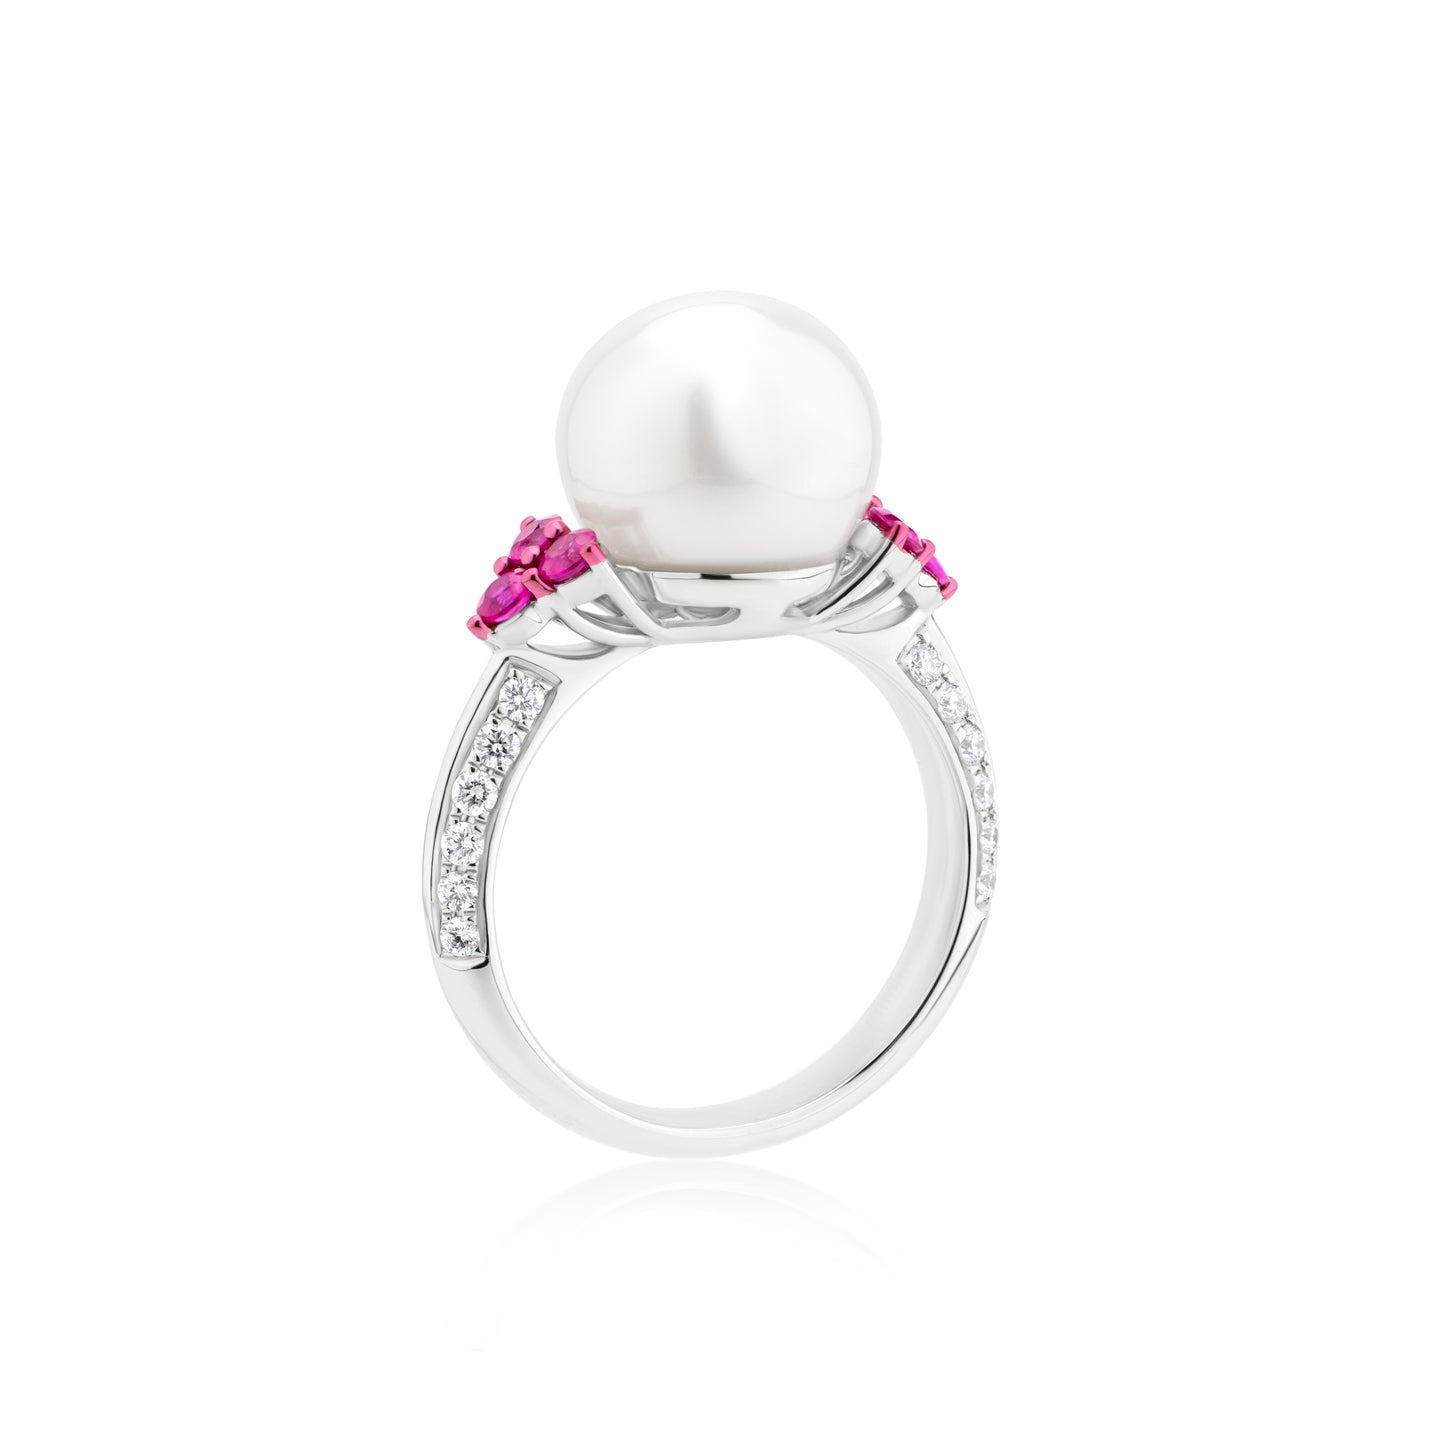 Ring With Pearl,Ruby And Diamond In 18K White Gold And Pink Rhodium